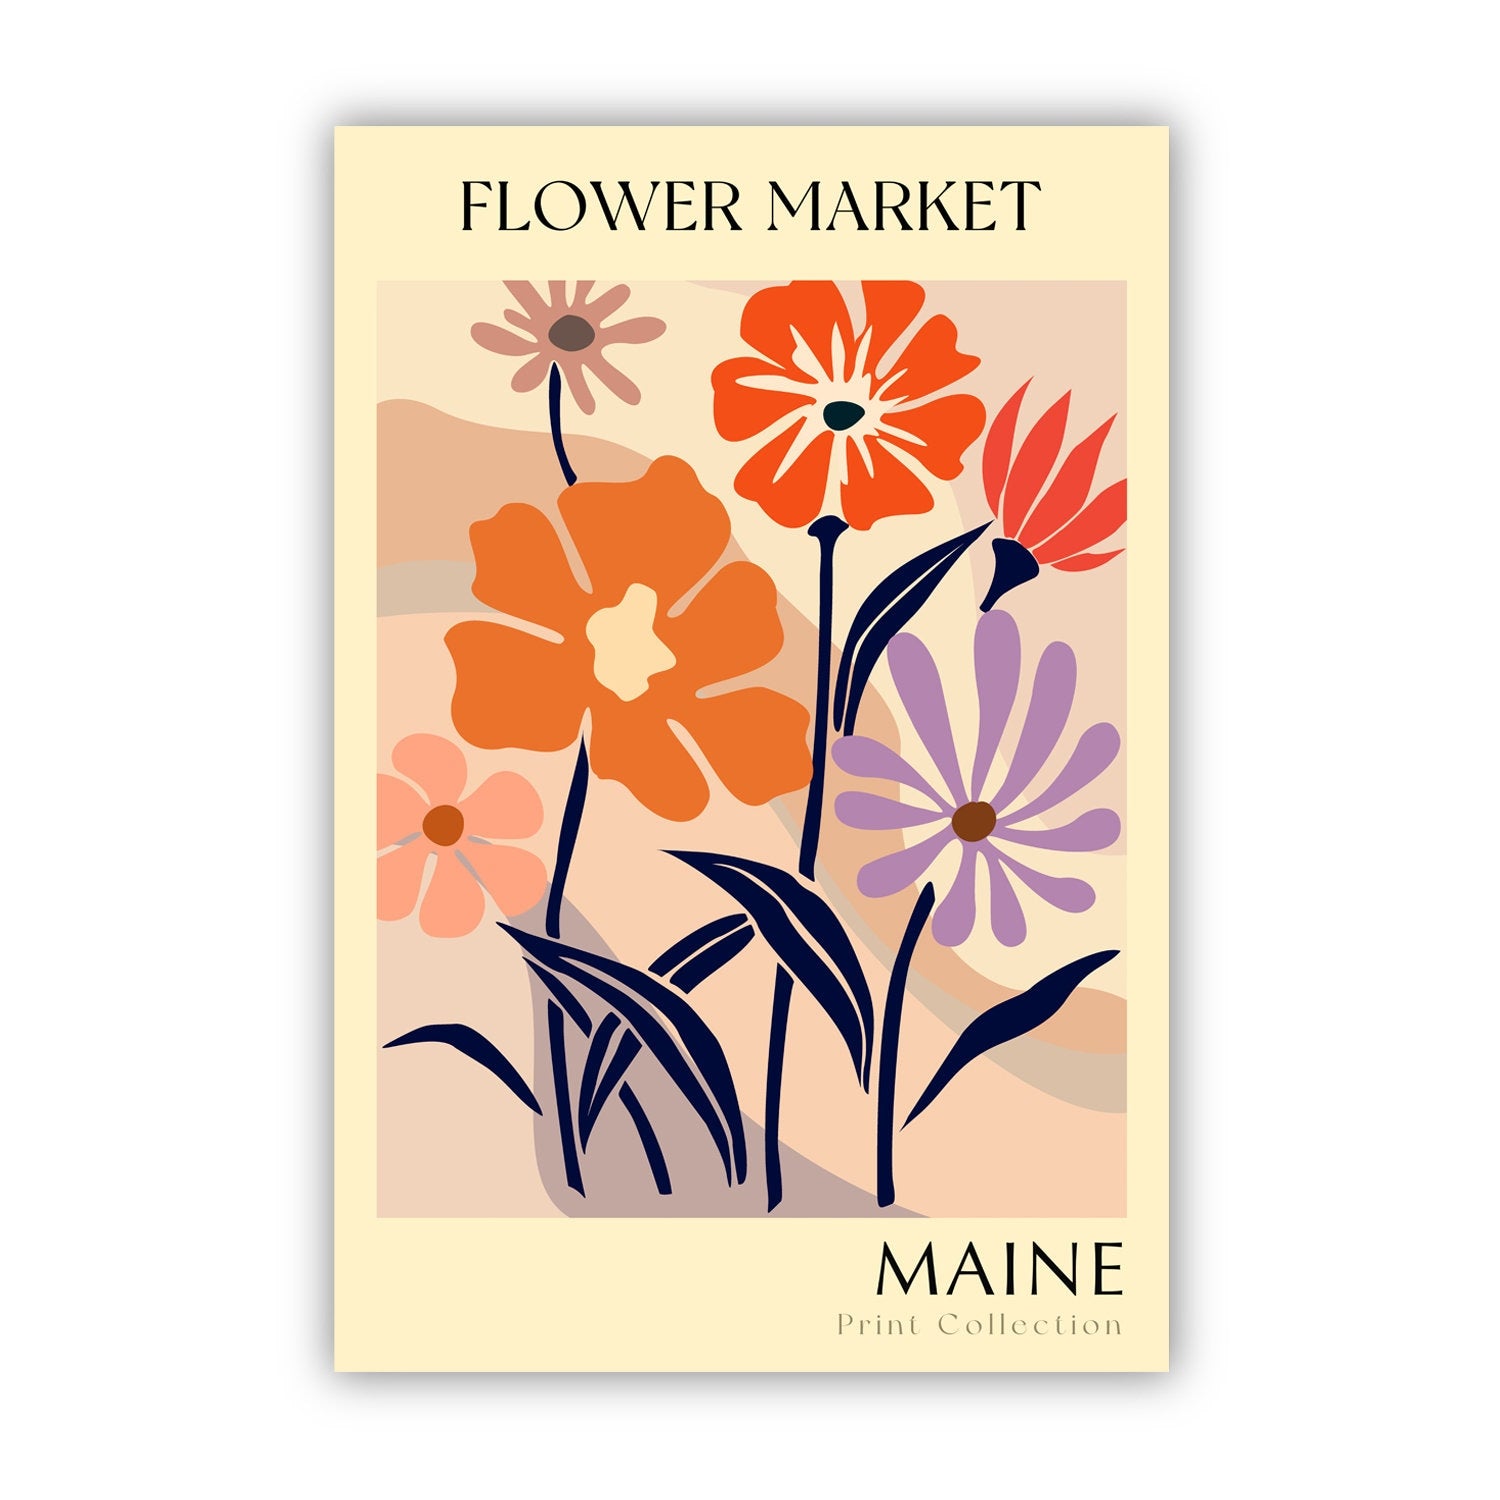 Maine State flower print, USA states poster, Maine flower market poster, Botanical posters, Nature poster artwork, Boho floral wall art